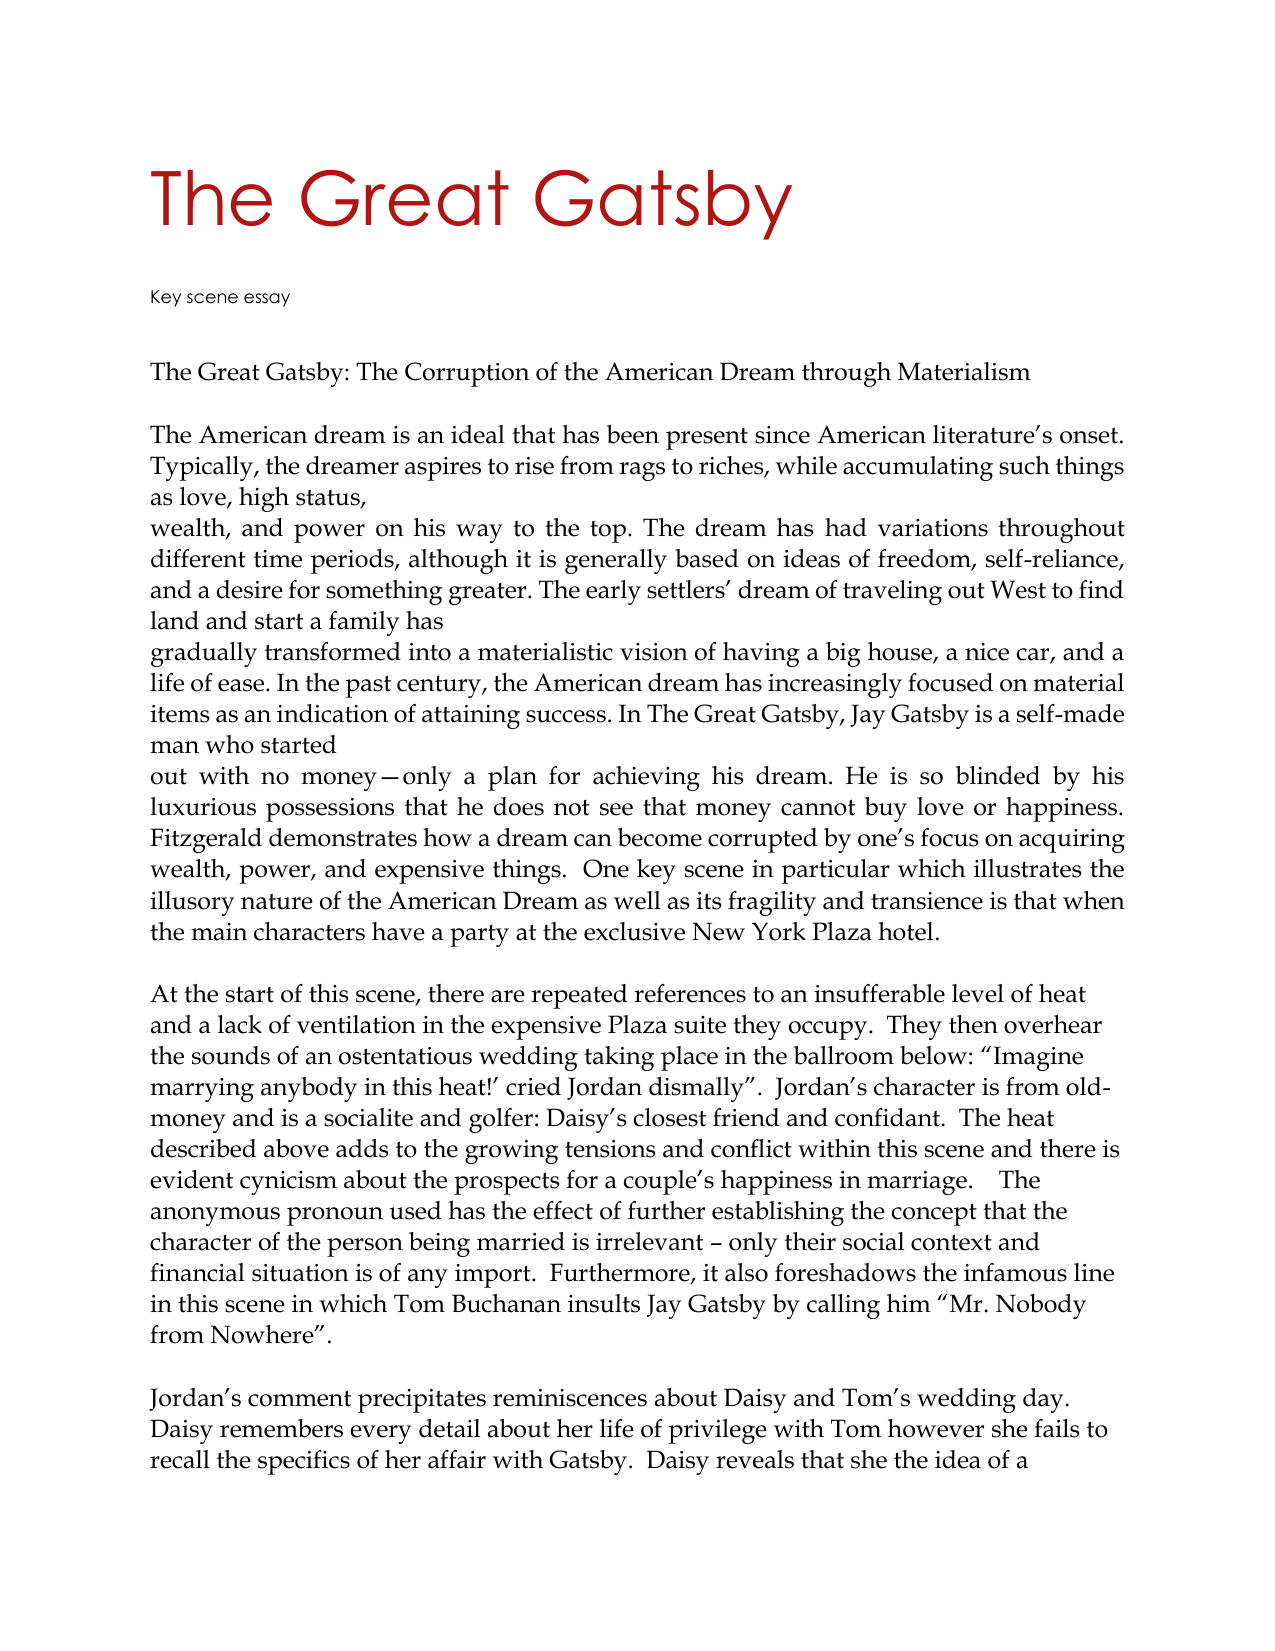 the great gatsby essay quizlet